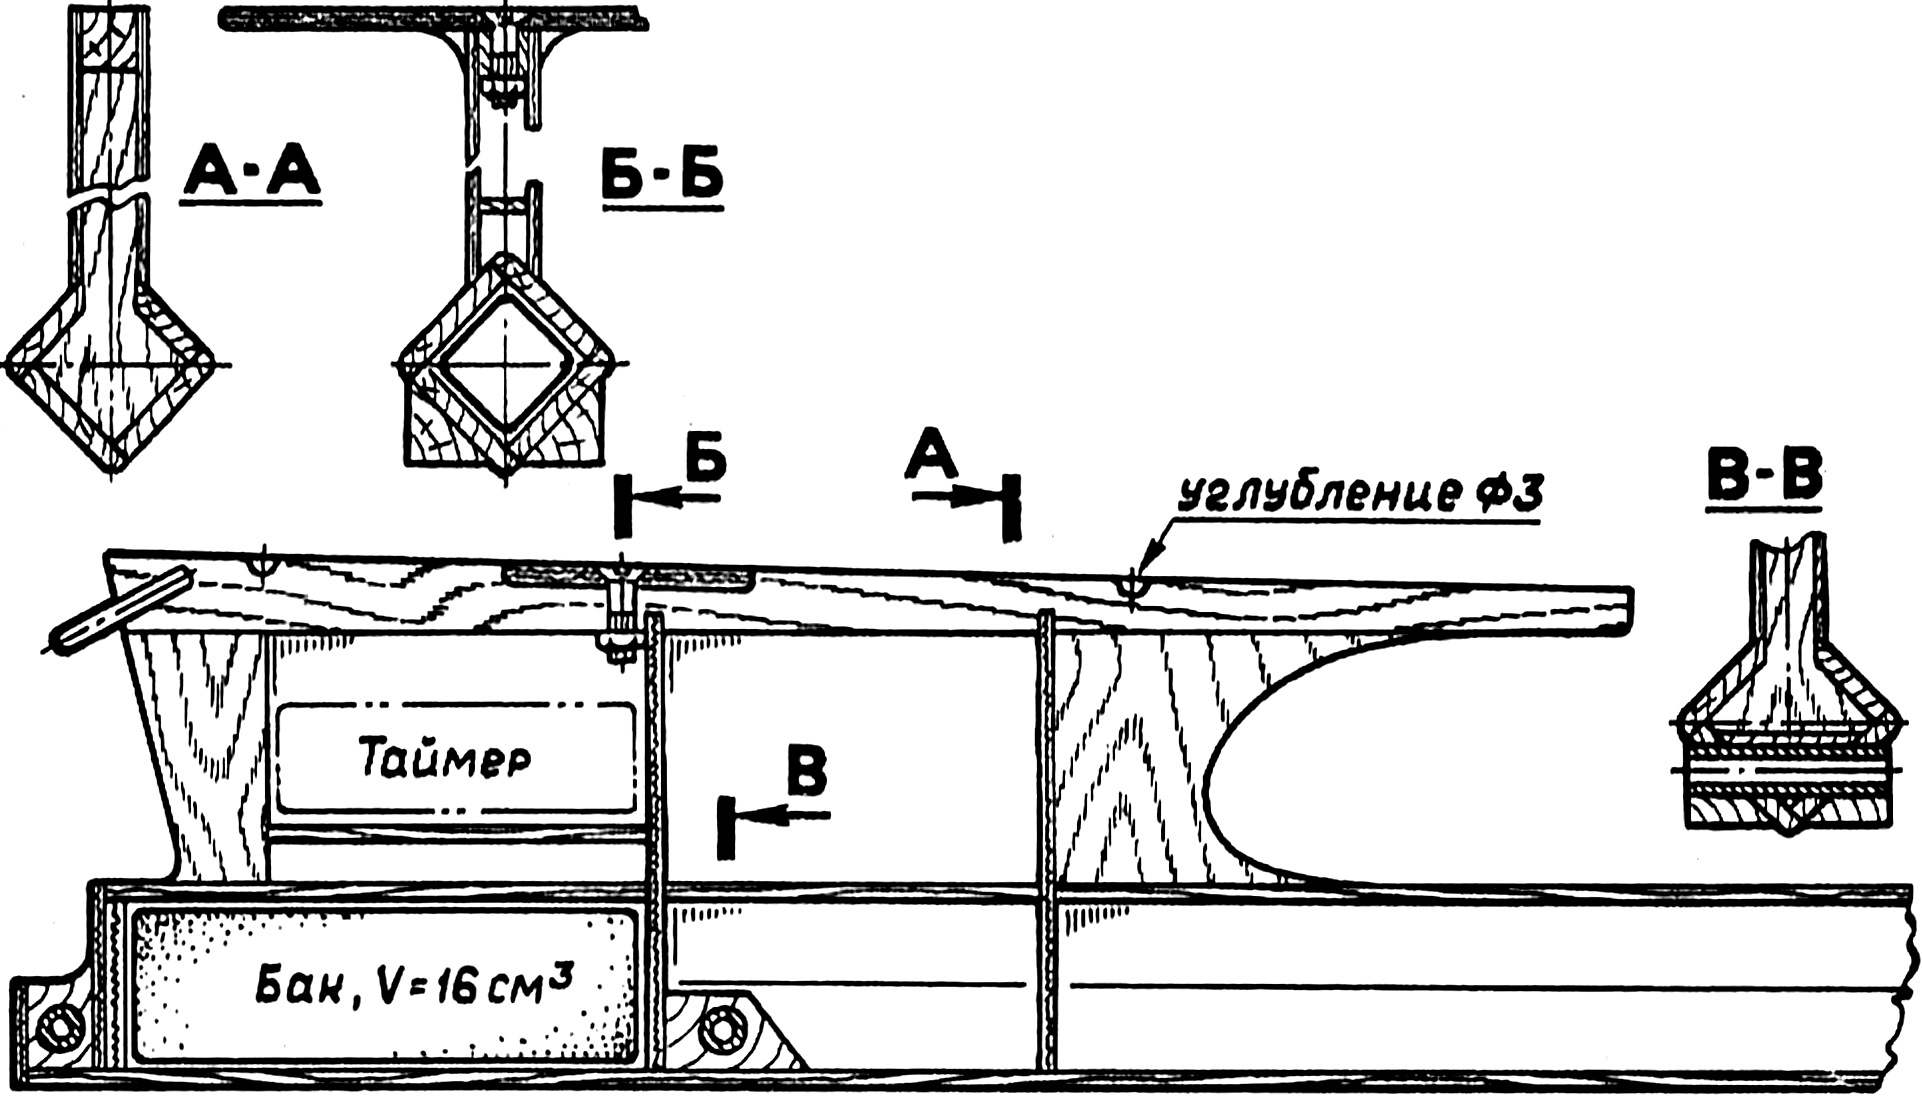 Fig. 7. The nose of the fuselage.